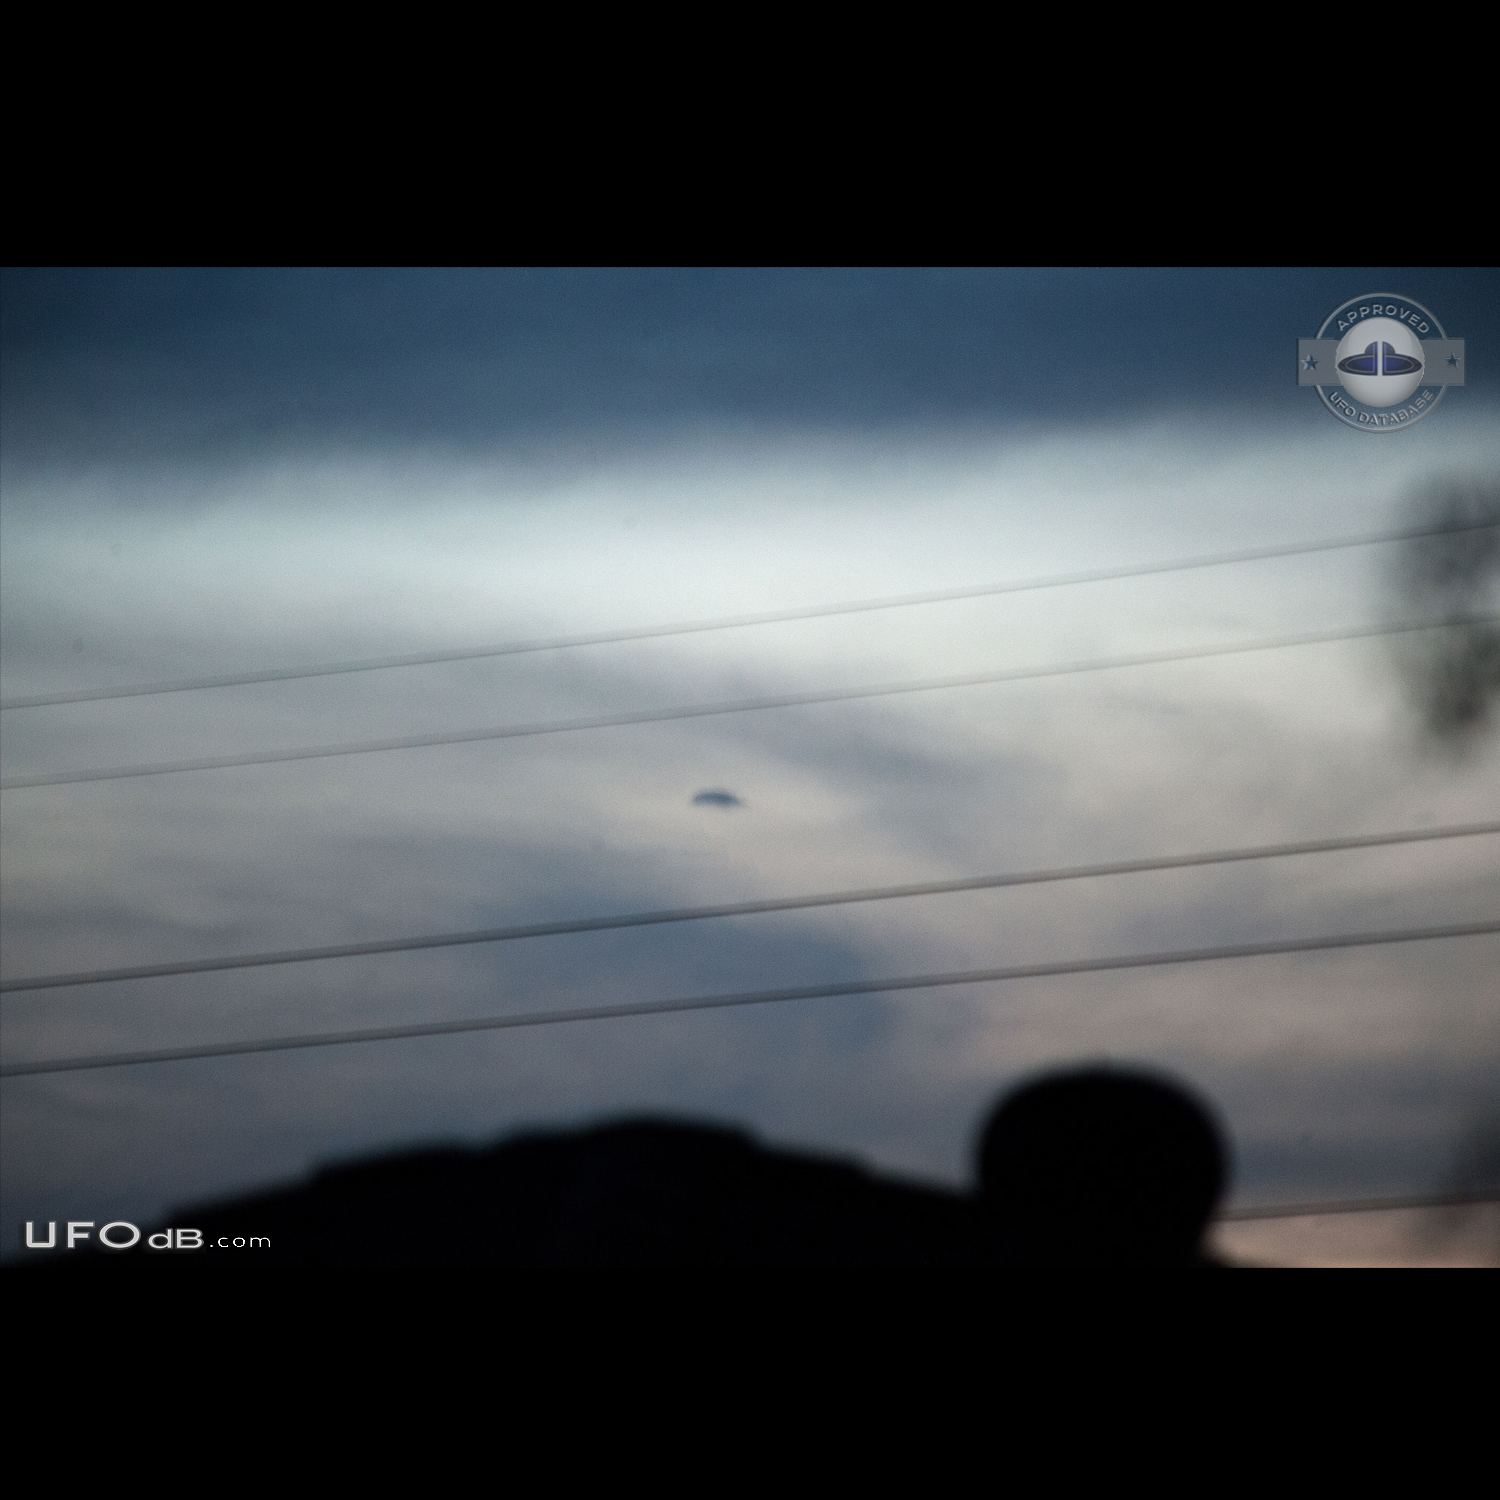 Hovering disc UFO moved then disappeared in the clouds Brisbane Queens UFO Picture #776-1